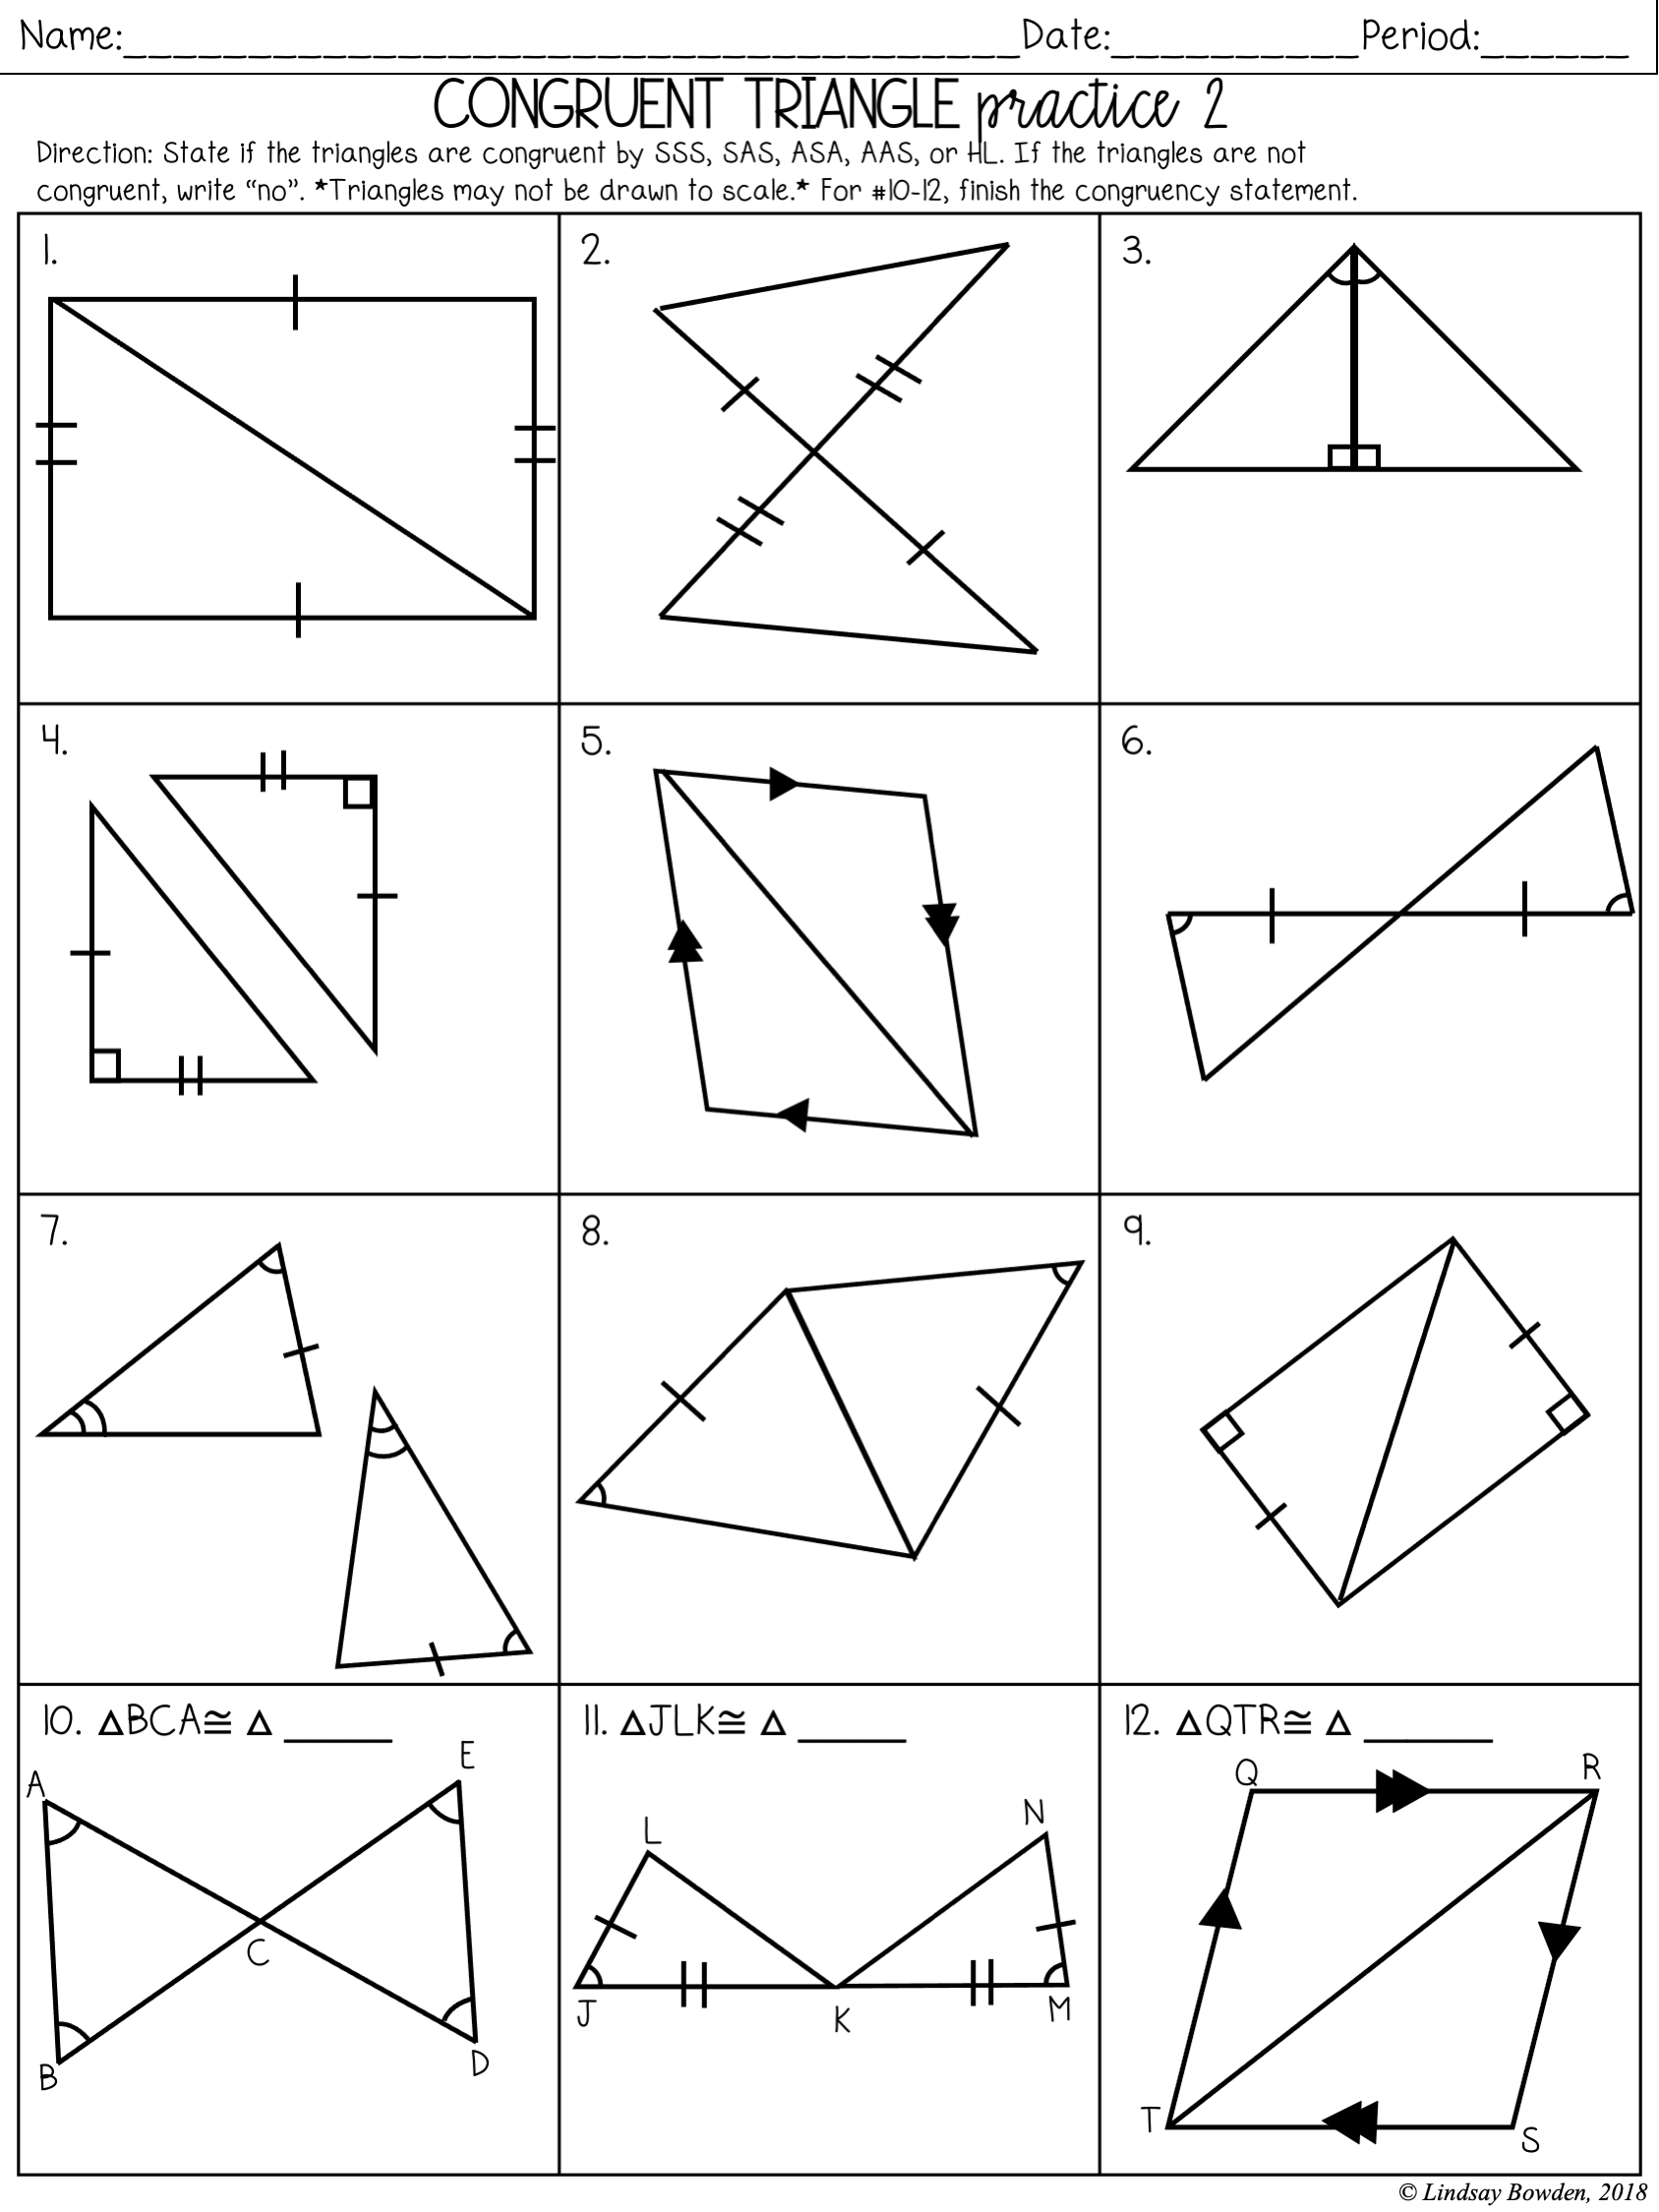 Congruent Triangles Notes and Worksheets - Lindsay Bowden With Congruent Triangles Worksheet With Answer